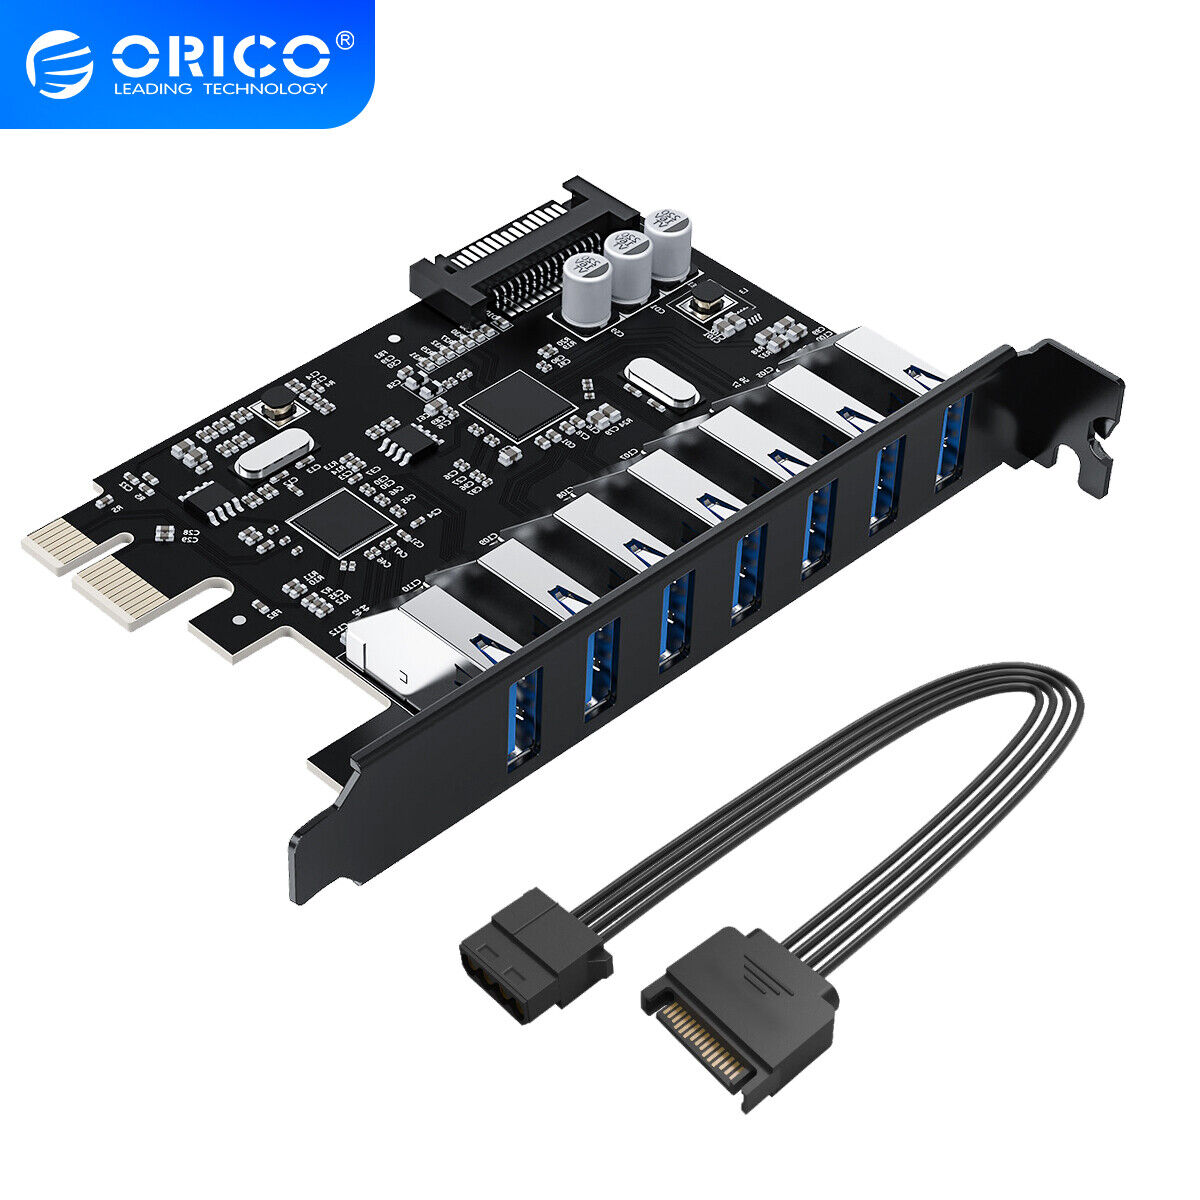 ORICO USB3.0 PCI-E Expansion Card Adapter 7Ports Hub Adapter External Controller